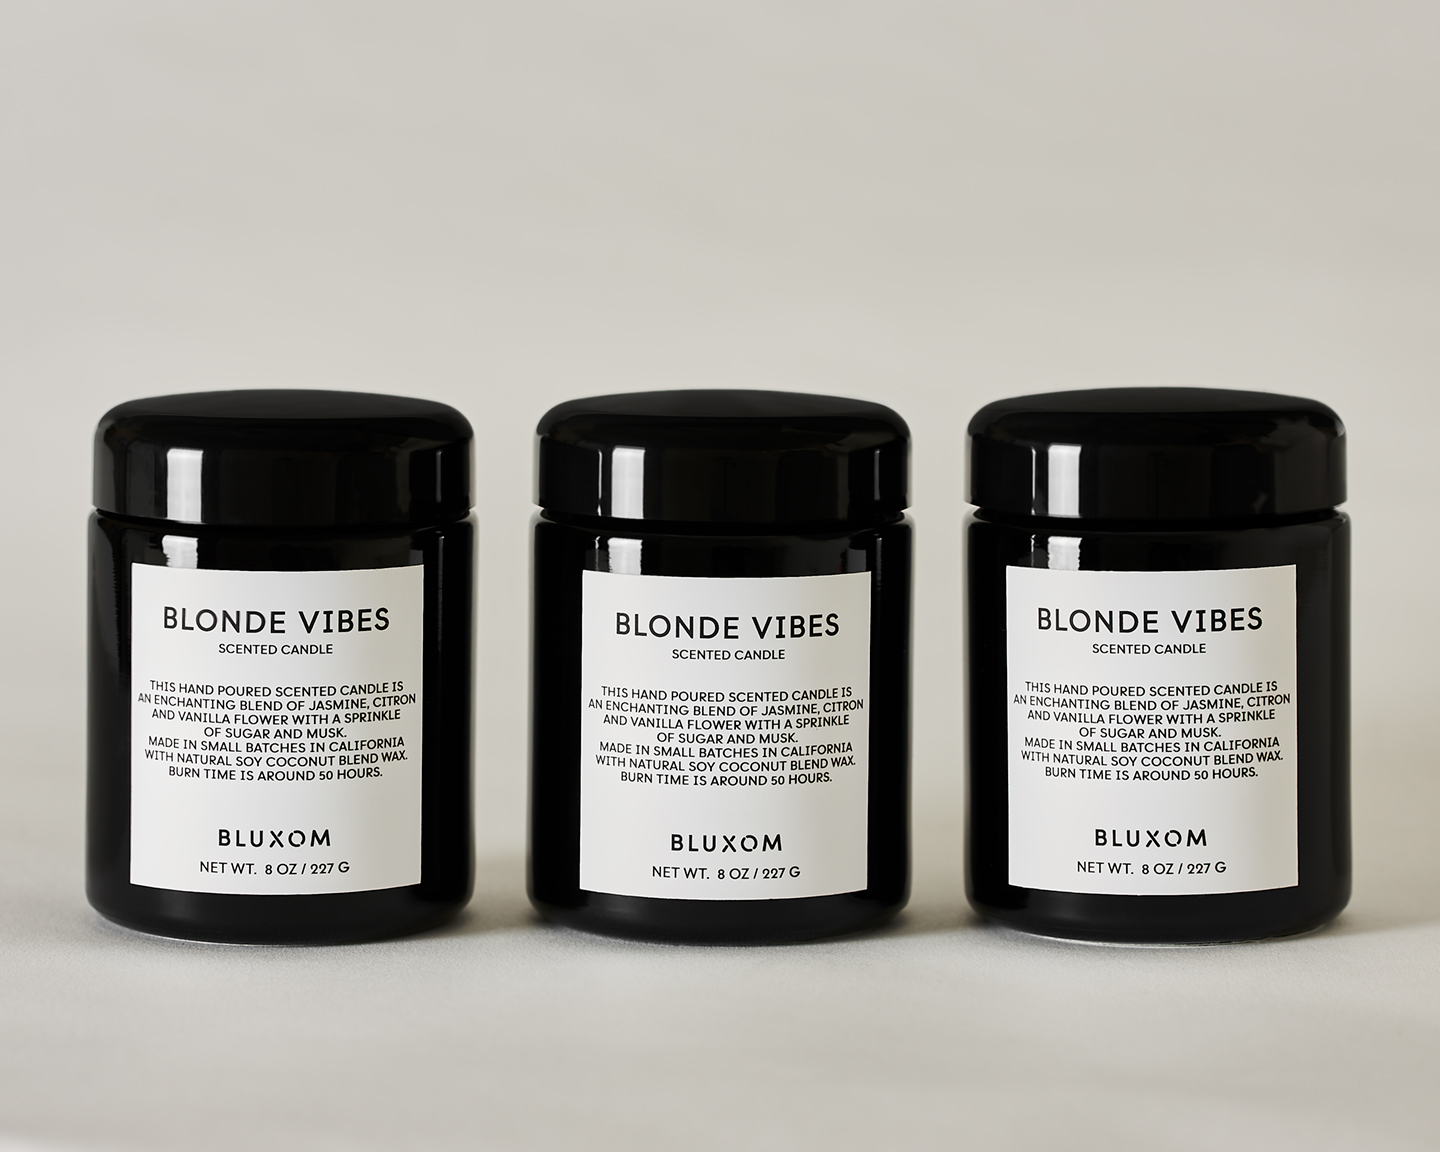 BLUXOM BLONDE VIBES SCENTED CANDLE TRIO 3 x 8oz / 227g alt